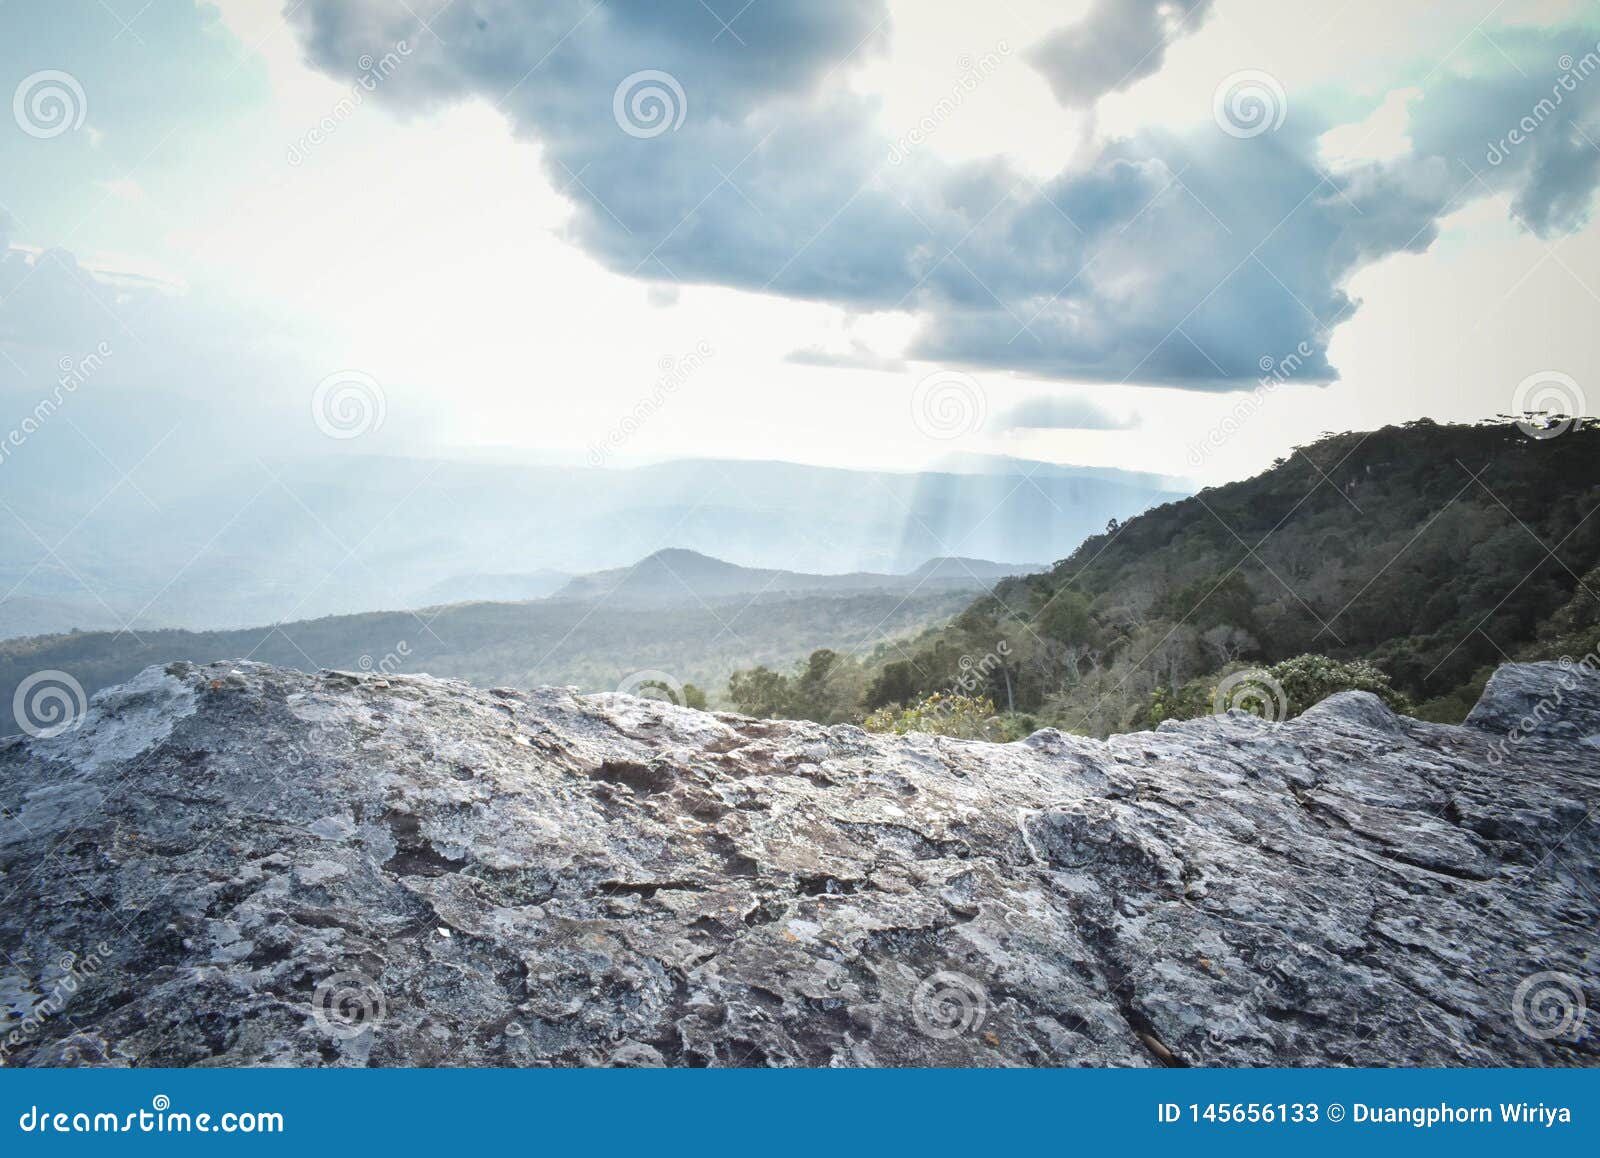 rugged cliffs on foreground and clear sky view in the background at phu kra dueng national park, loei thailand.